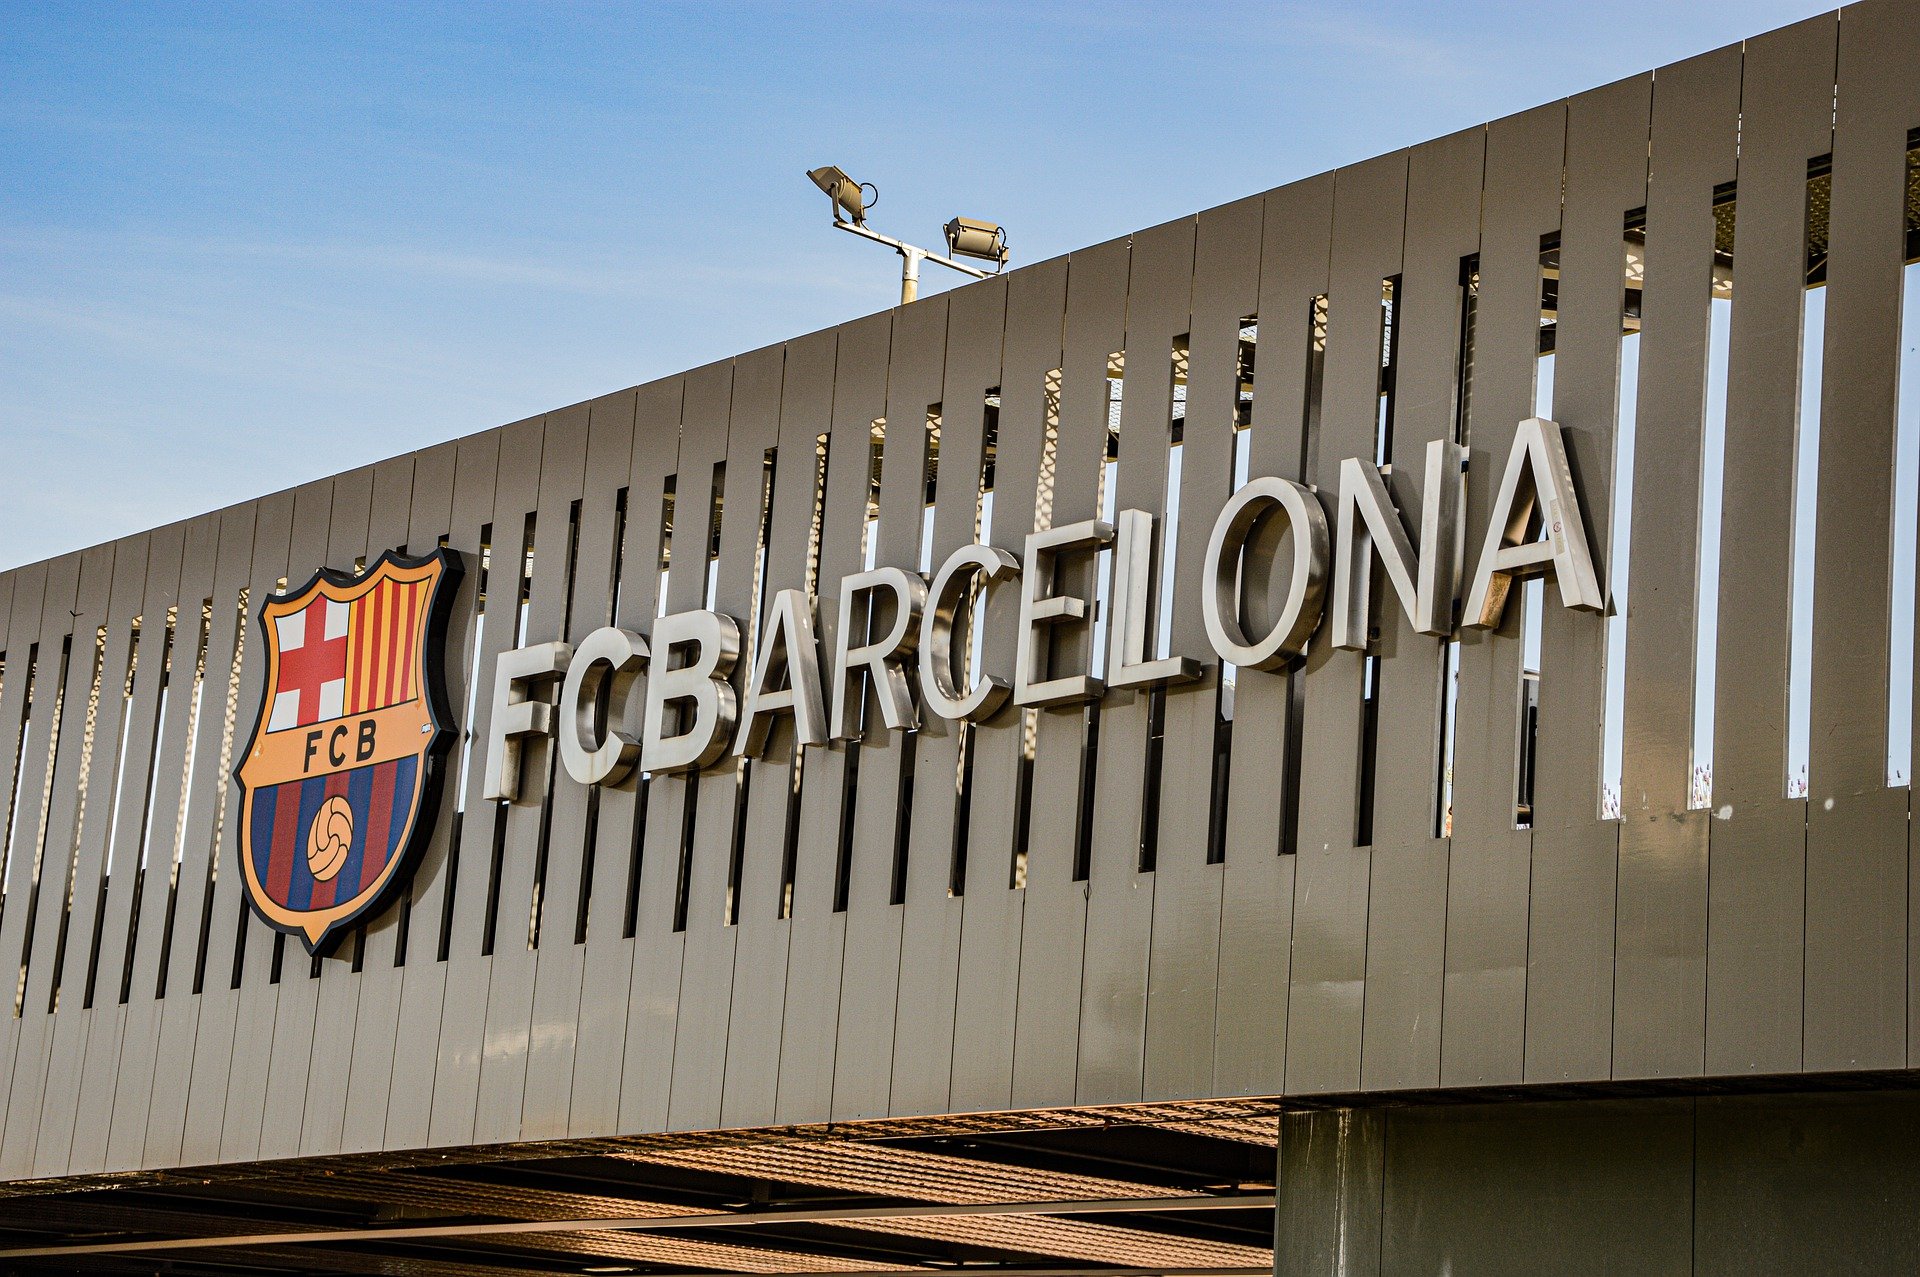 The entrance to the Camp Nou